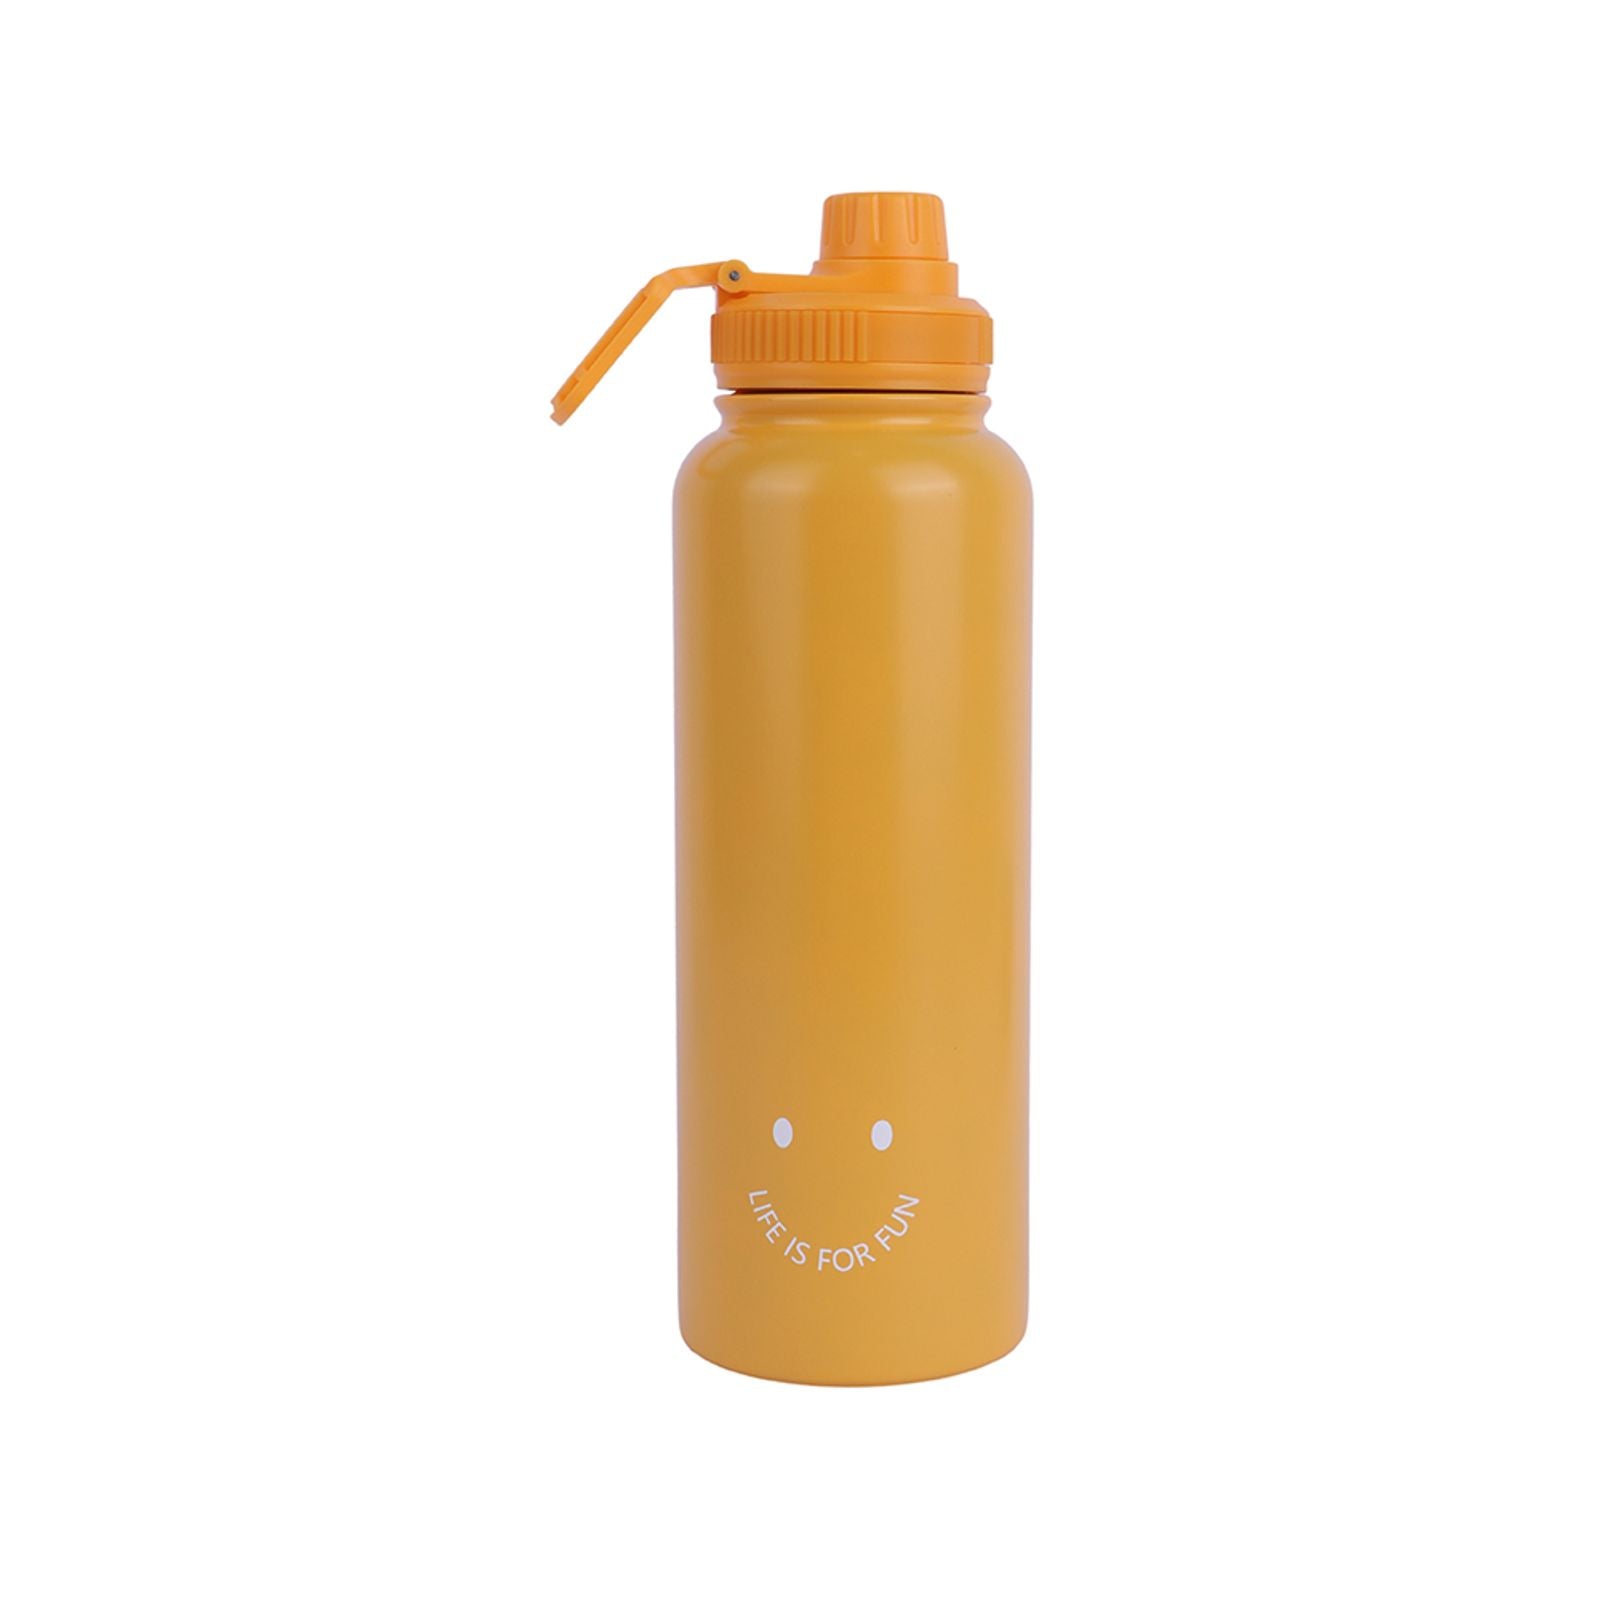 MINISO SOLID COLOR HANDHELD STAINLESS STEEL WATER BOTTLE 1.4L(YELLOW) 2015239615107 STEEL CUP